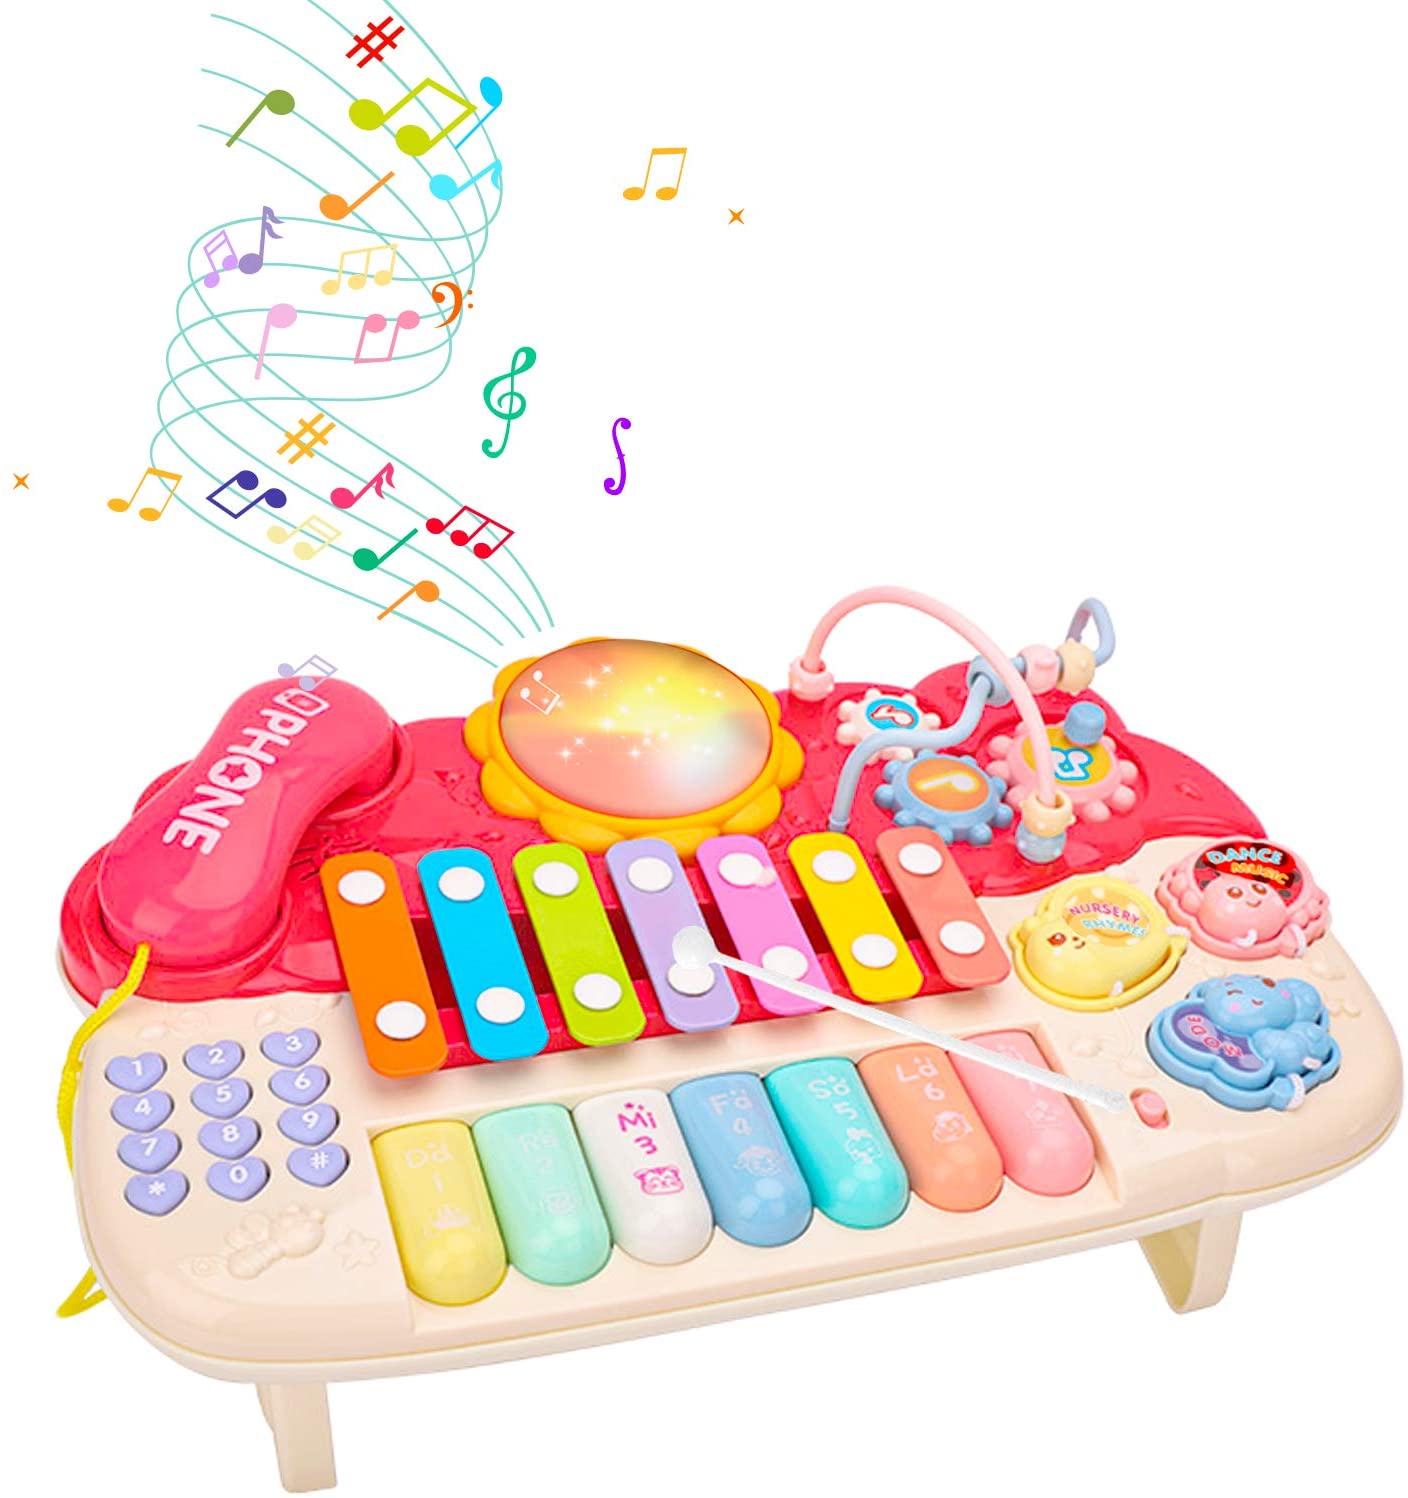 Good quality Wooden Baby Toys 12 Months - Arkmiido Baby Musical Toys – Drum Toy Set with Phone Bead Maze Gear Xylophone Piano – Mucial Toys for Toddlers Learning Toys for 18+ Boys Girl...